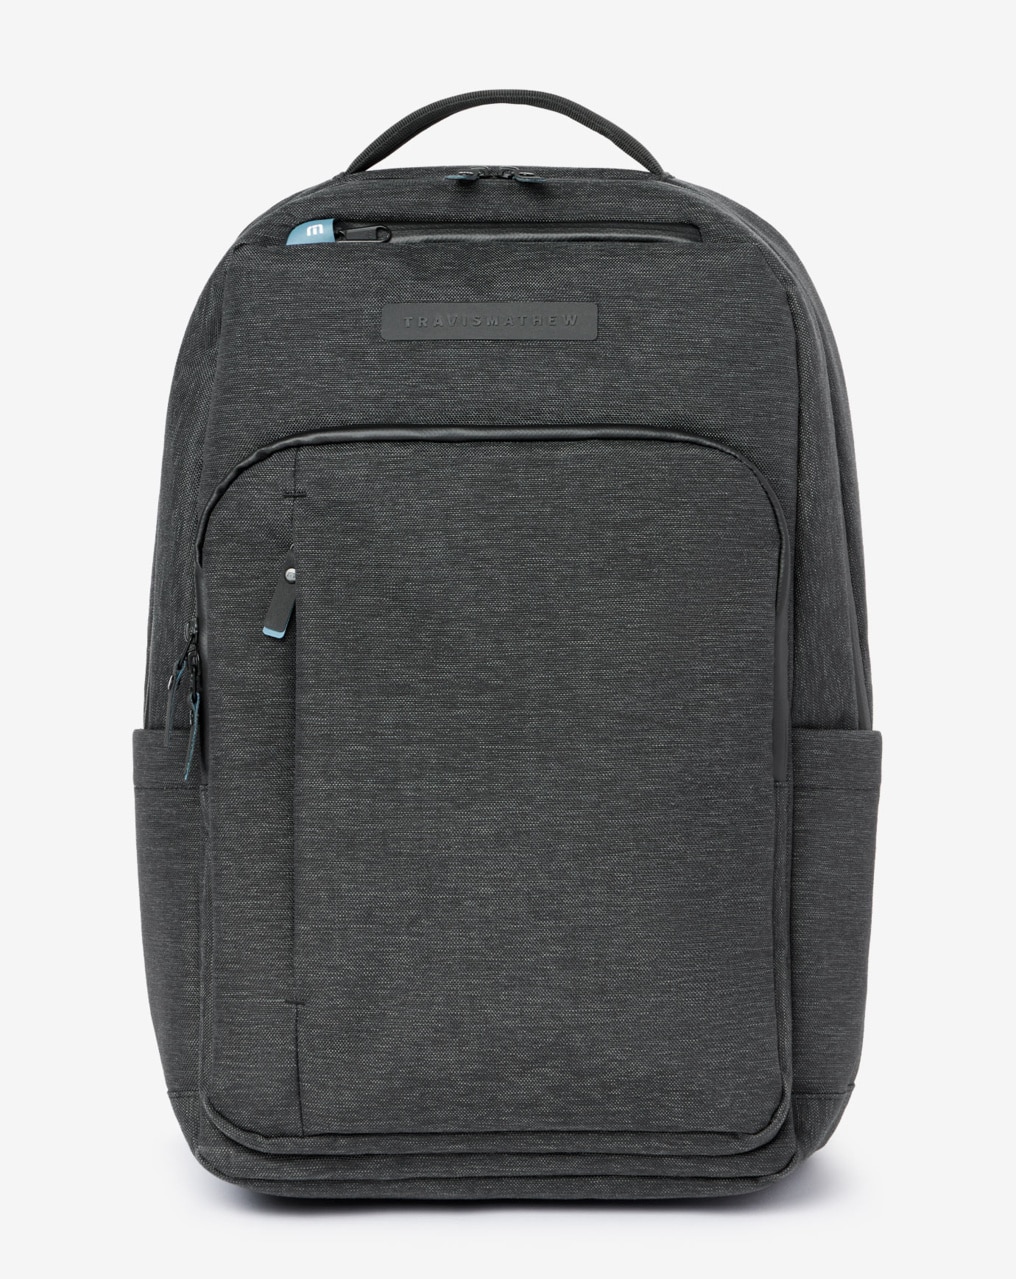 EXPANDABLE BACKPACK 2.0 1